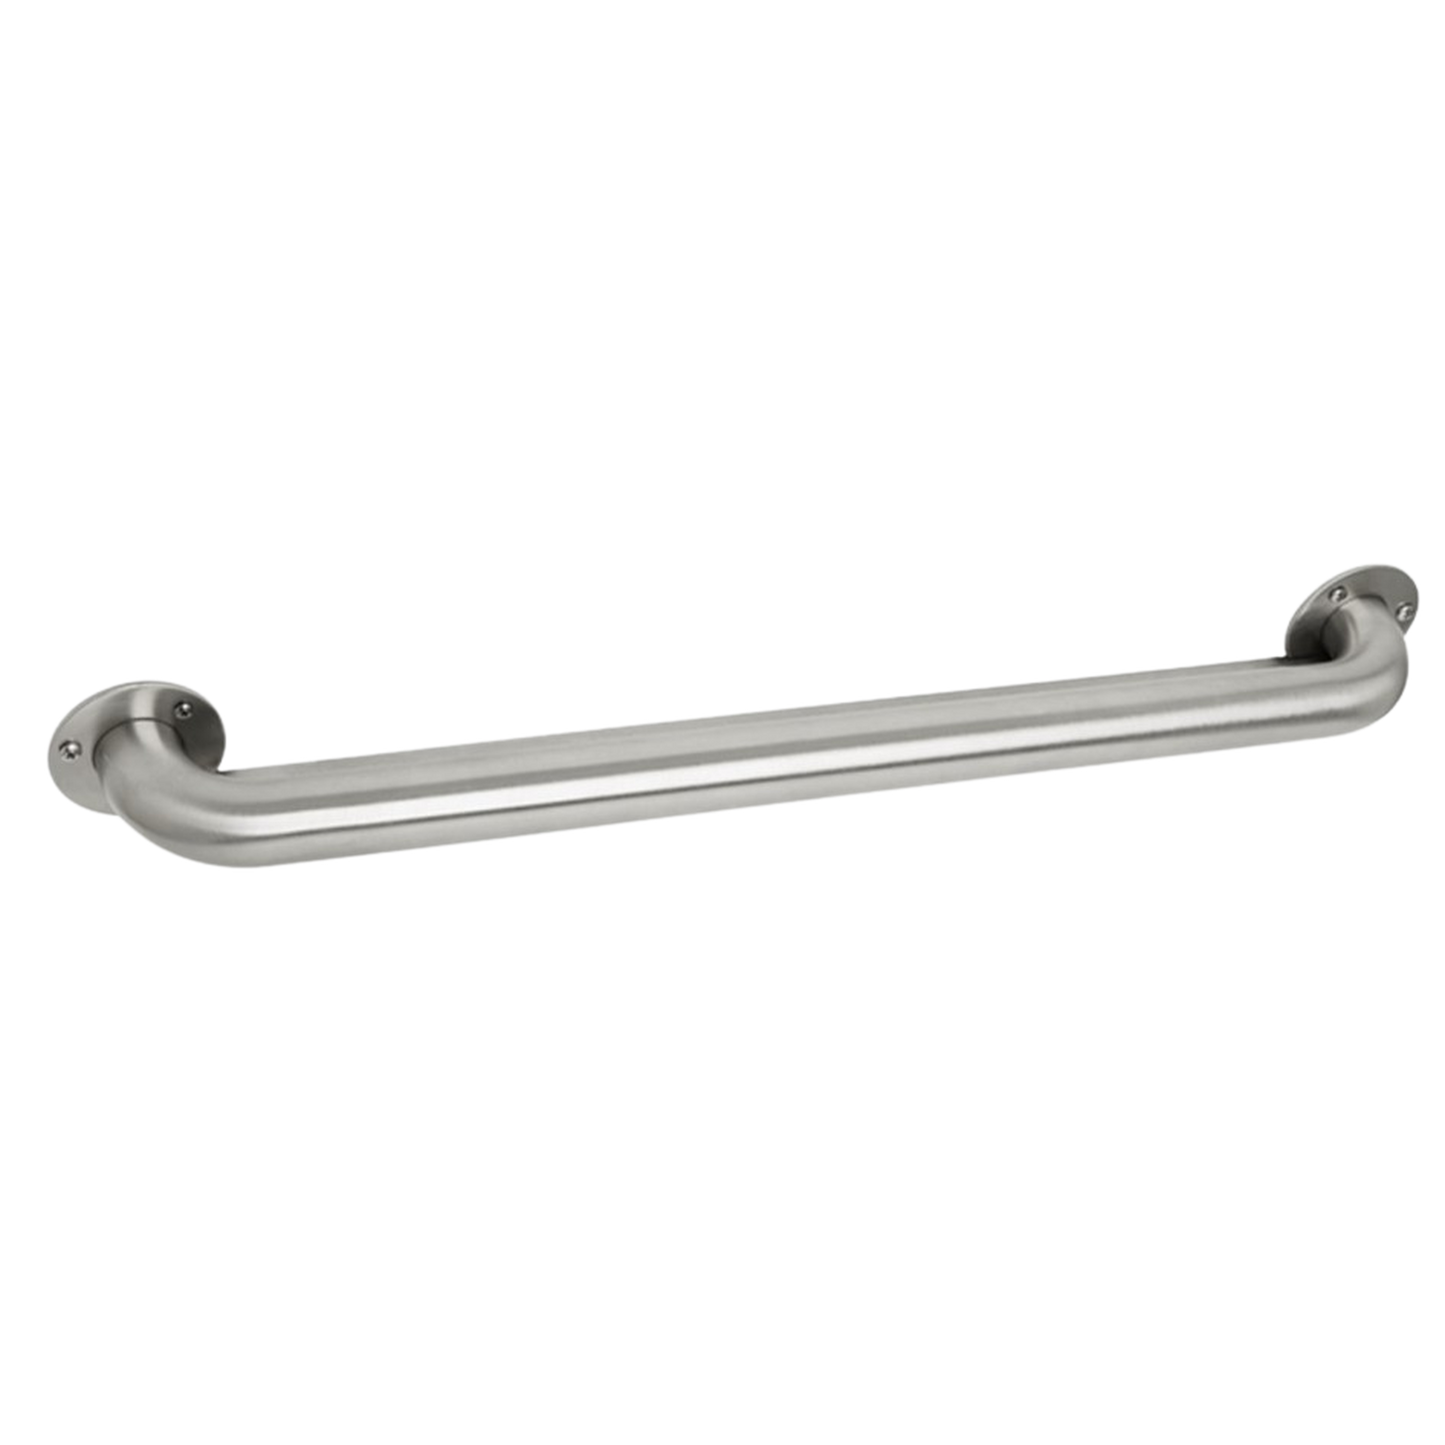 Seachrome Signature Series 30" Satin Stainless Steel 1.5 Diameter Exposed 3-Hole Mounting Flange Switch Weld Standard Ligature Resistant Grab Bar